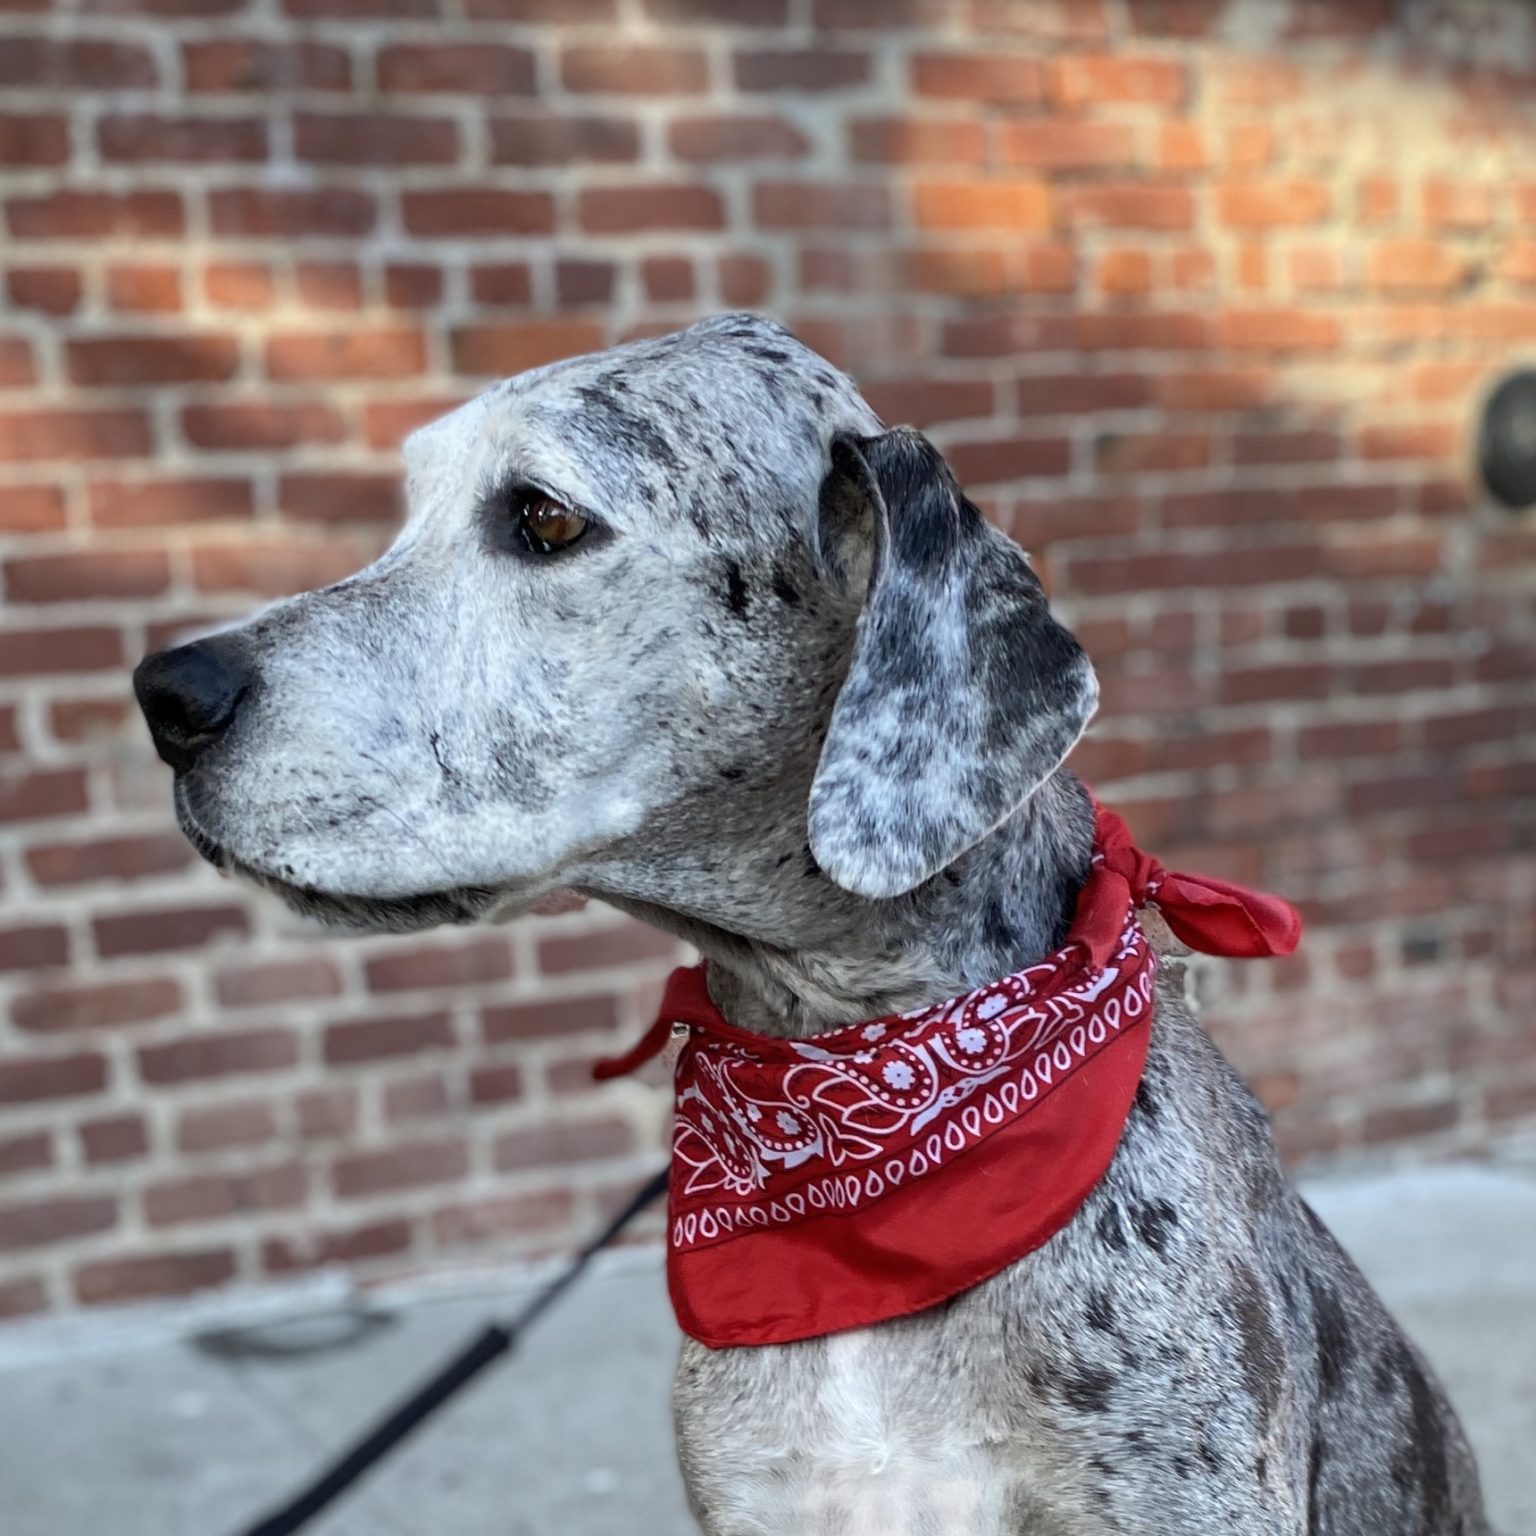 Merle Great Dane With Red Bandana Looks Serious